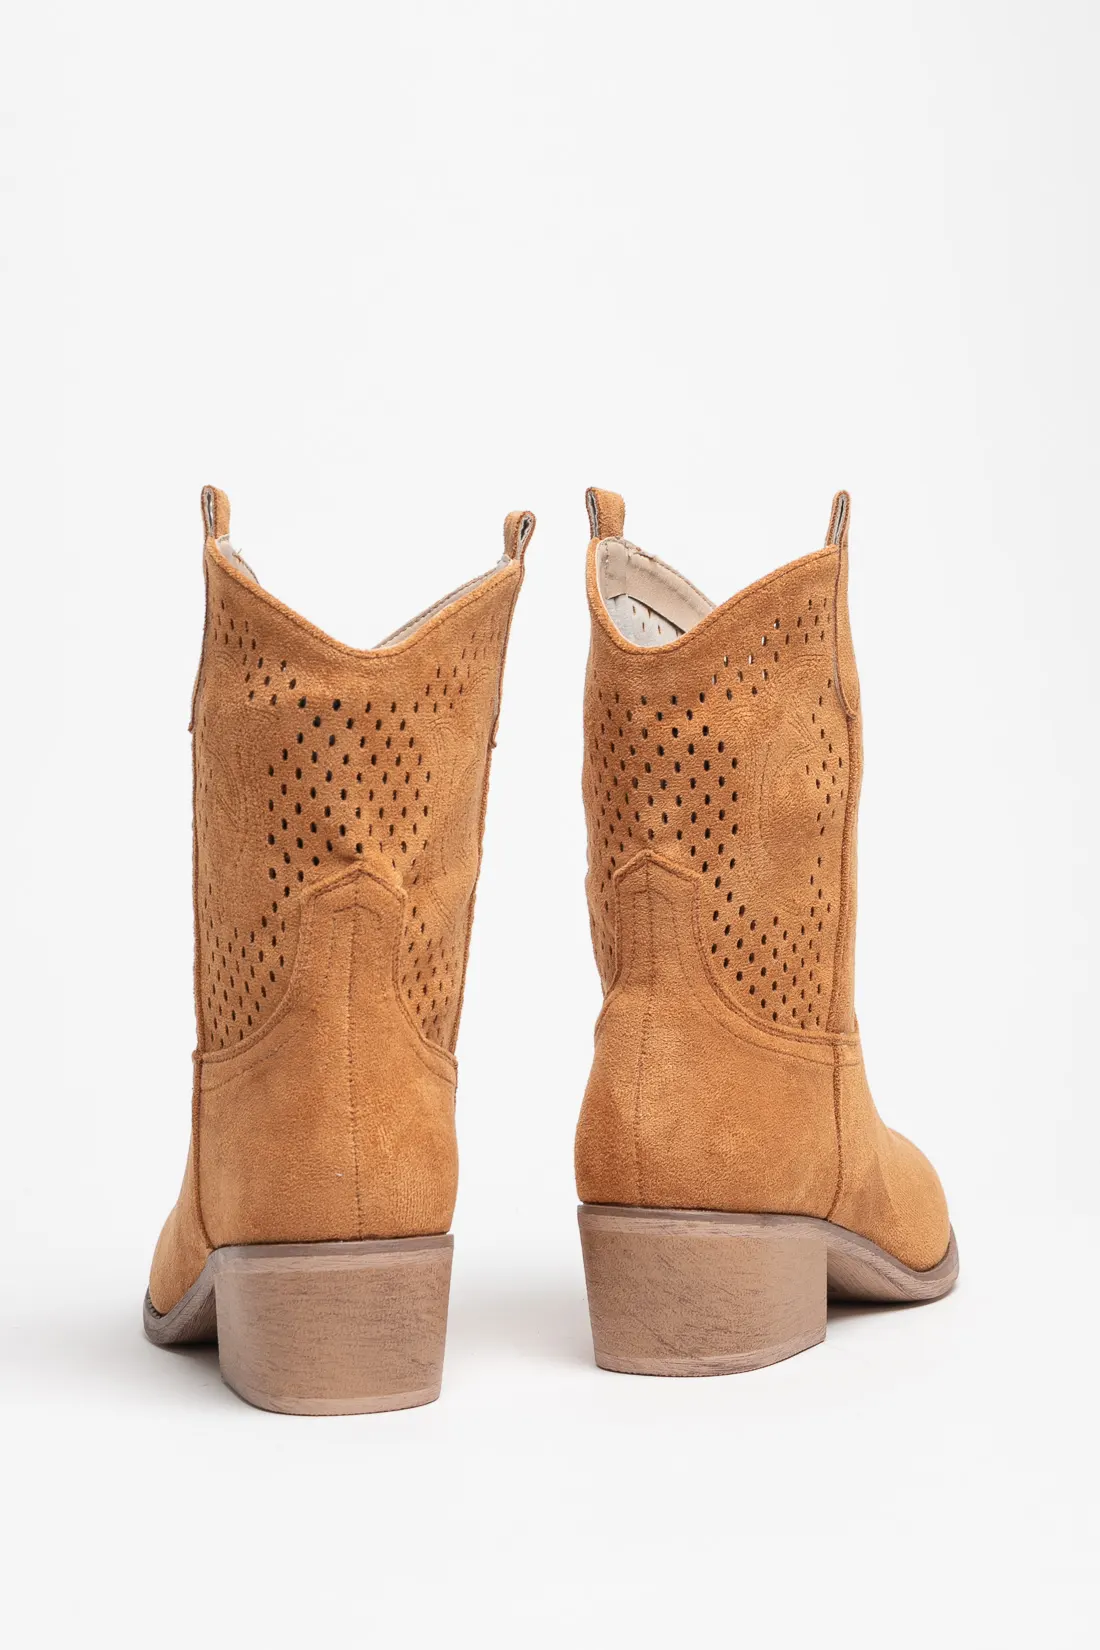 LOW COUNTRY BOOT RENY - CAMEL